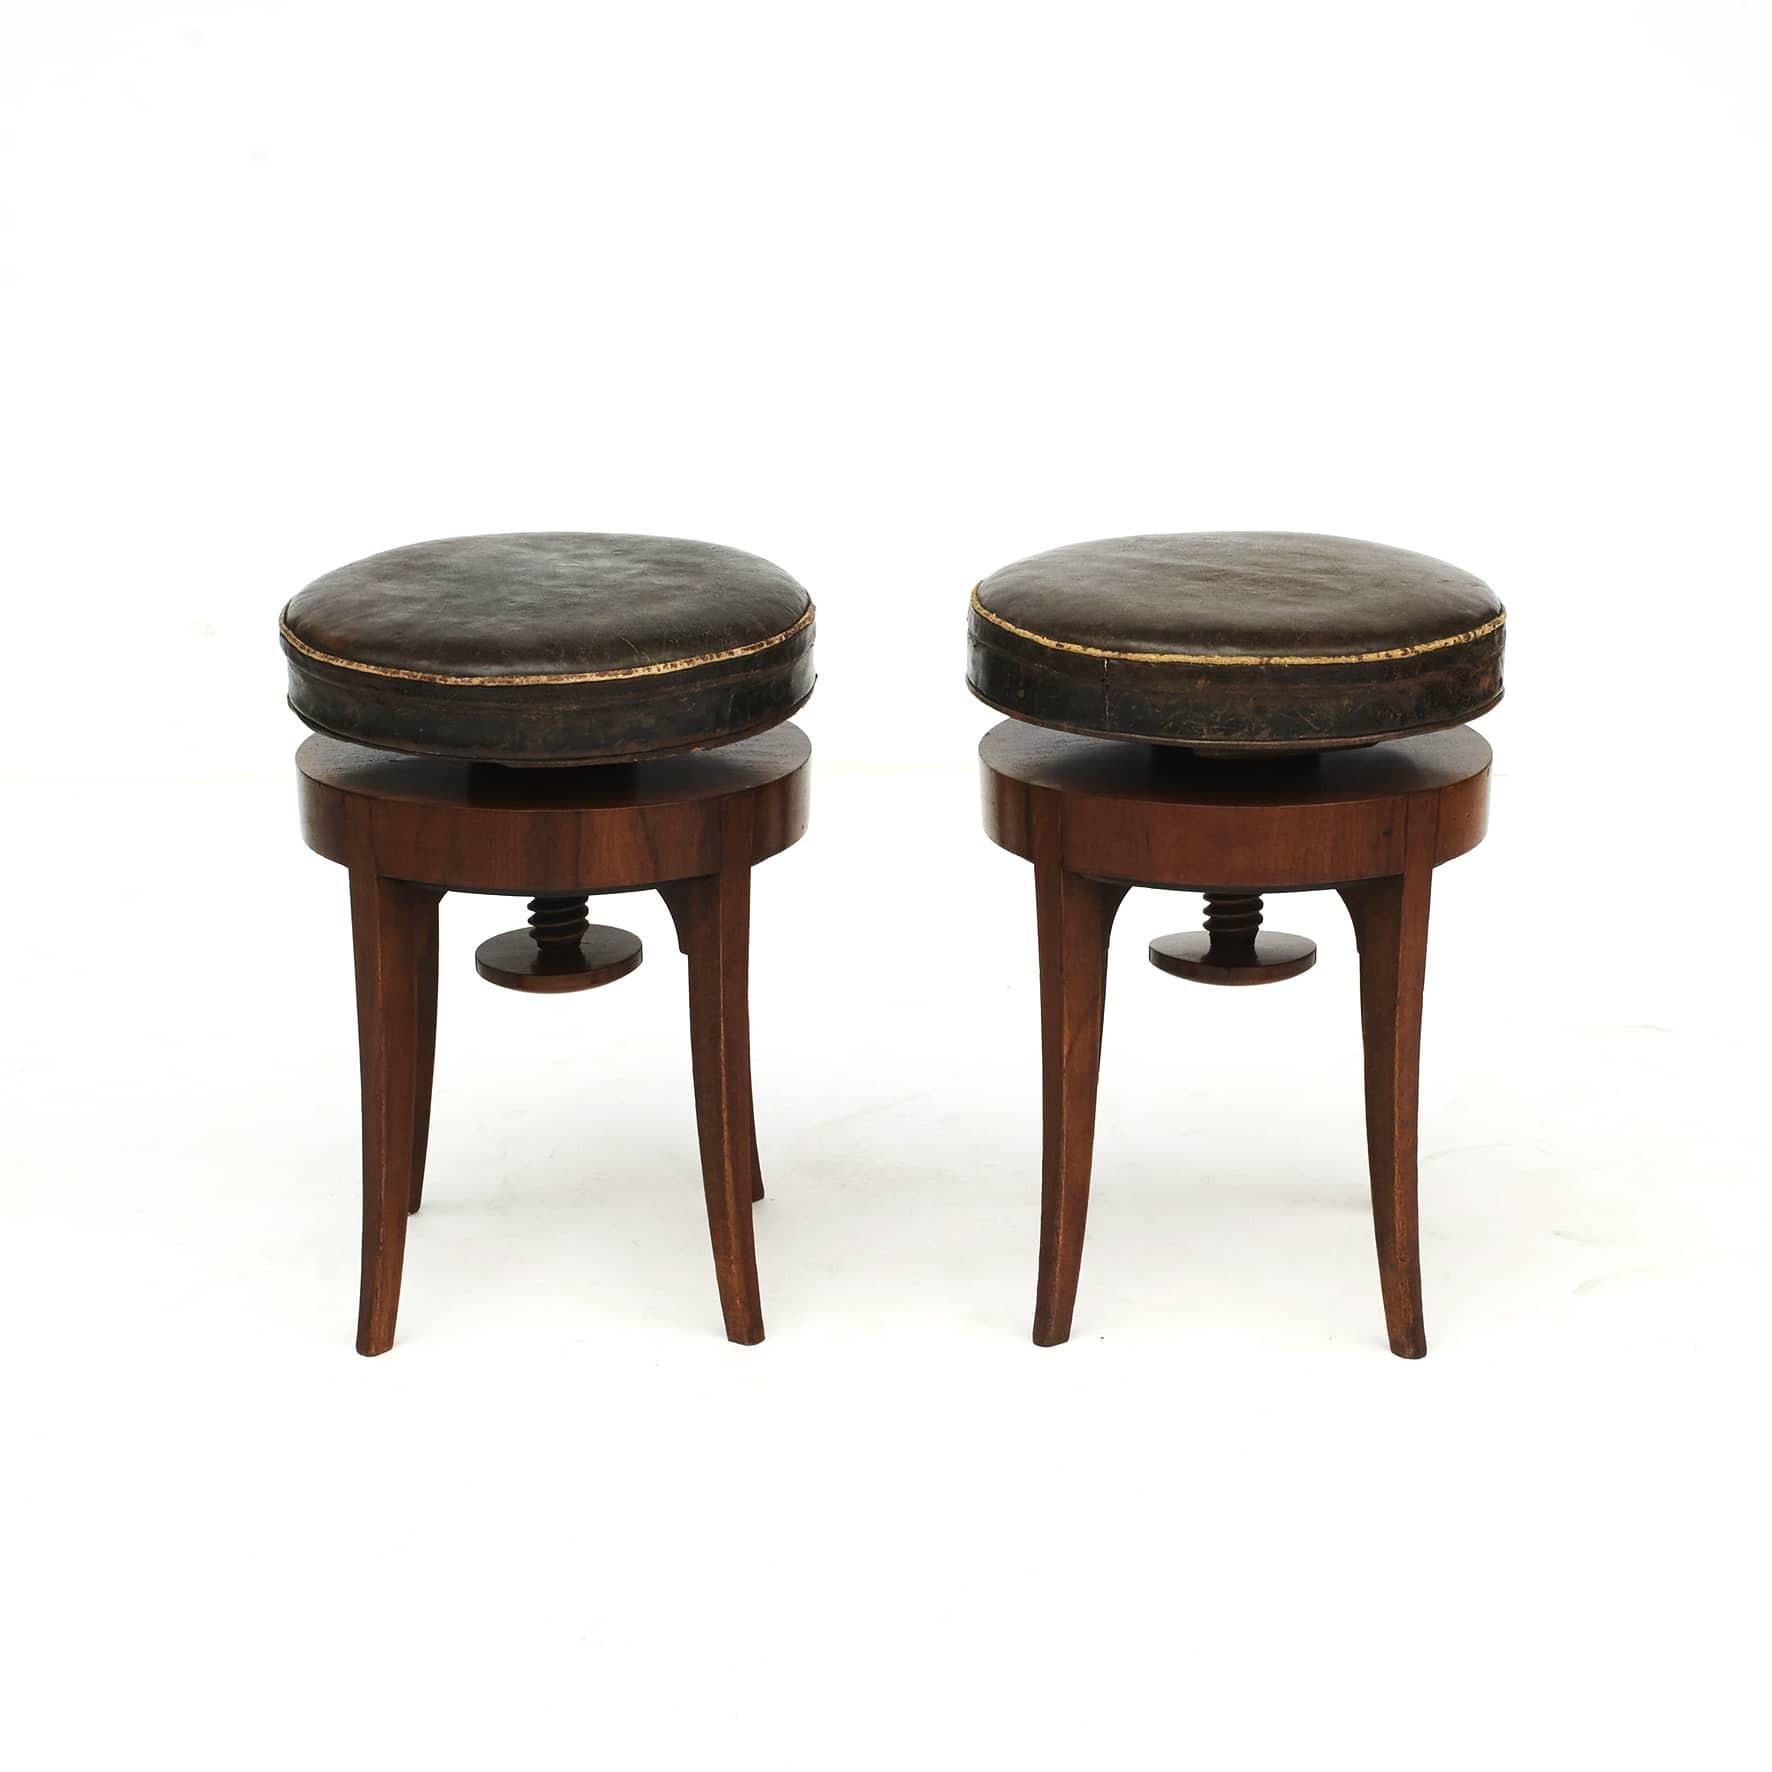 Elegant pair of height adjustable swivel stools.
Mahogany with round leather seat, original condition with beautiful patina.
Measures: Height adjustable from 54 cm to 62 cm (21,25 to 24,4 inches).